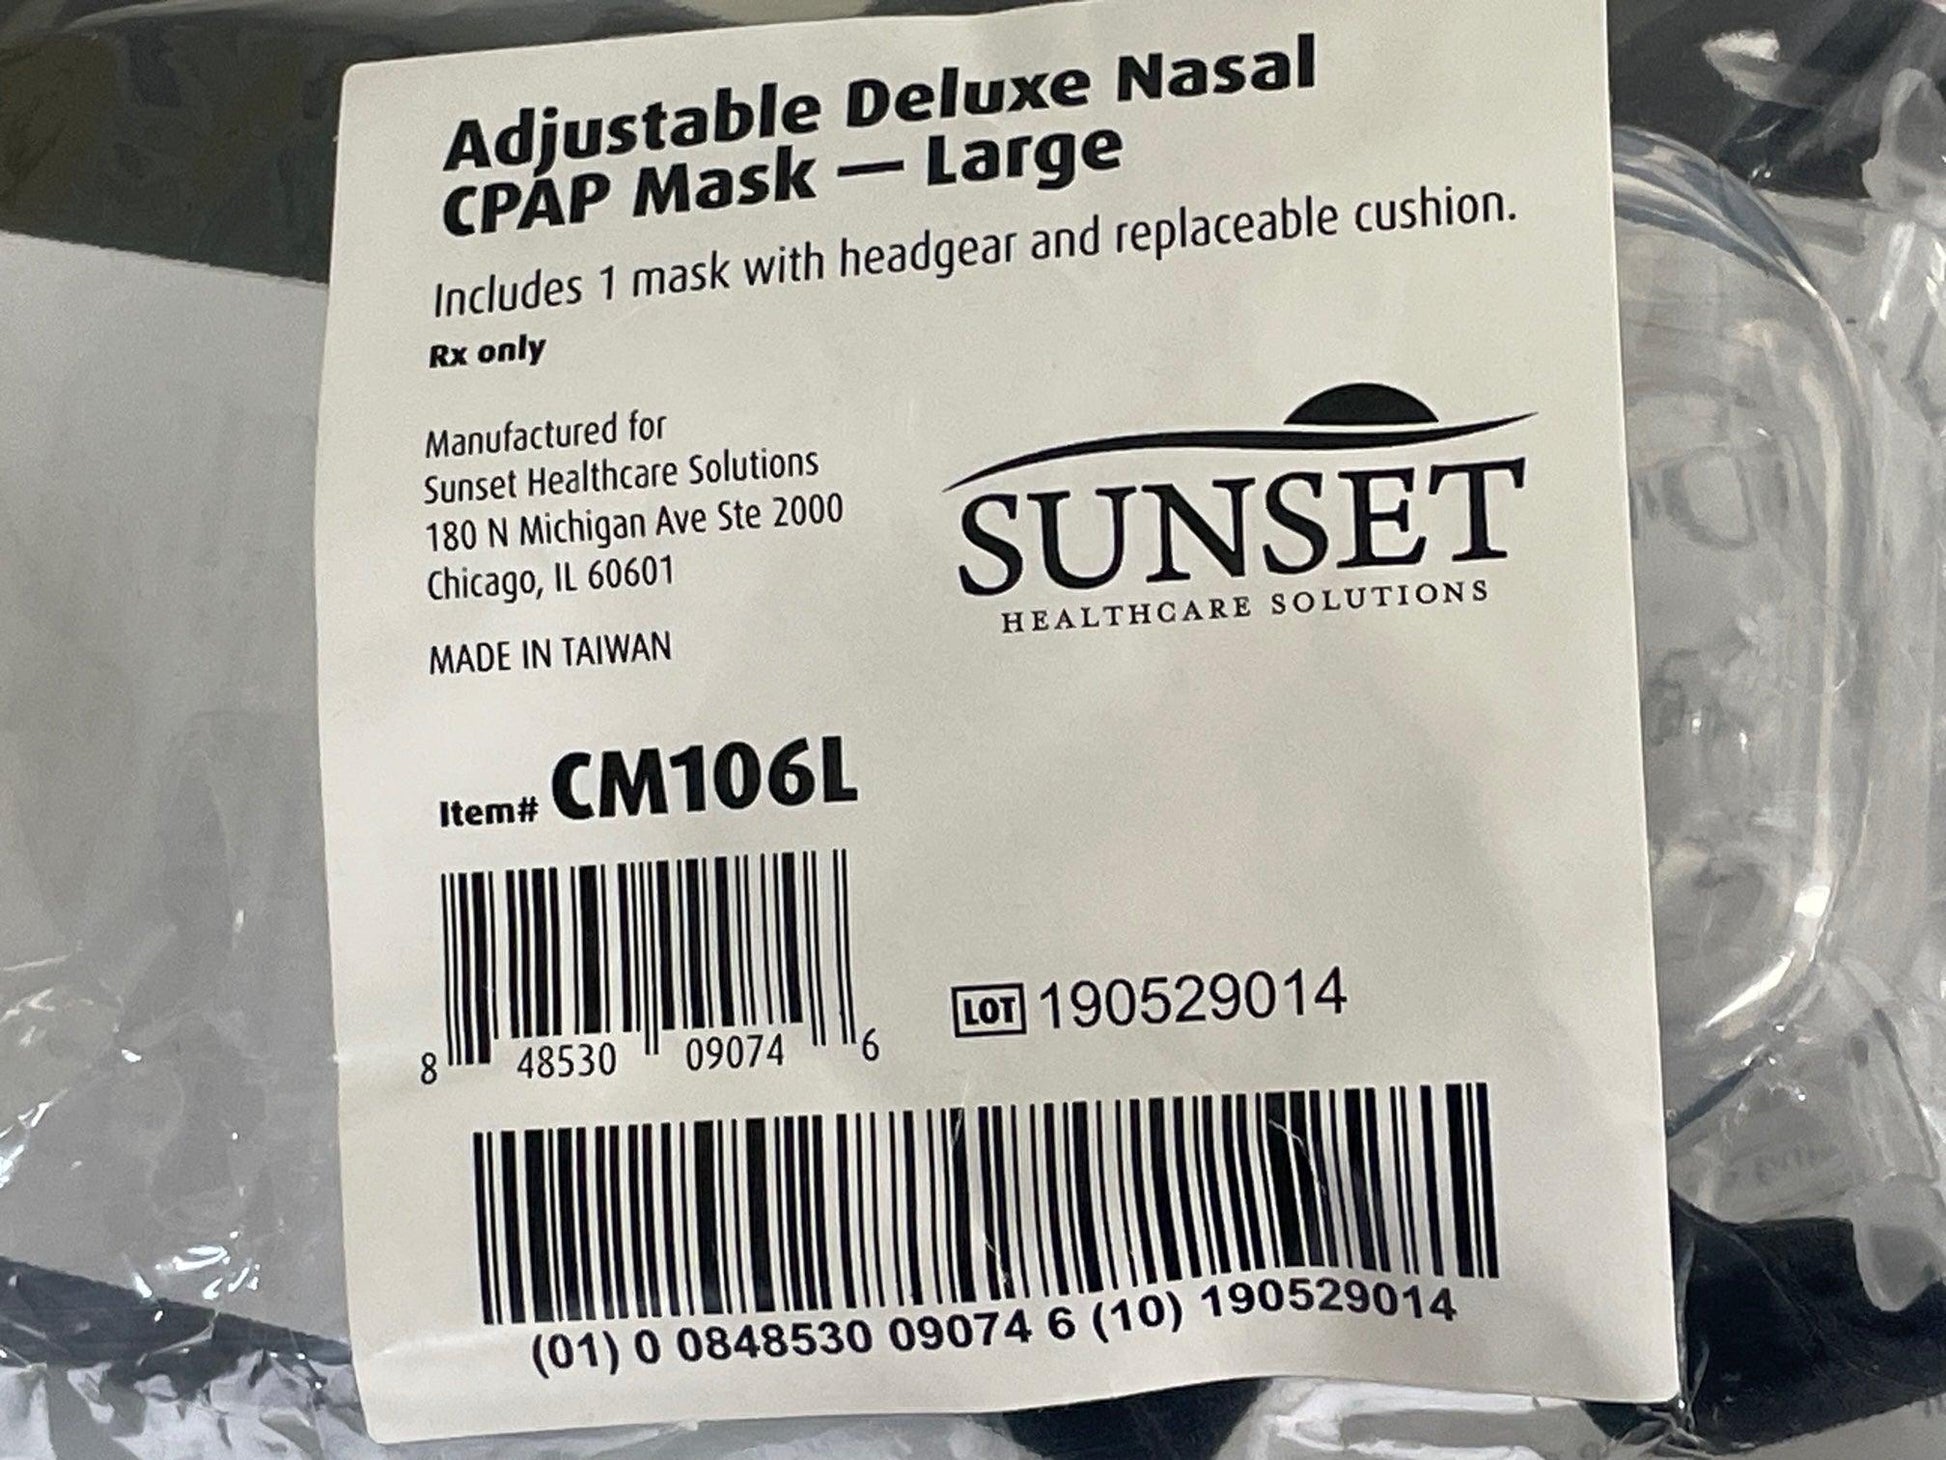 NEW Adjustable Deluxe Nasal CPAP Mask with Headgear CM106 - MBR Medicals